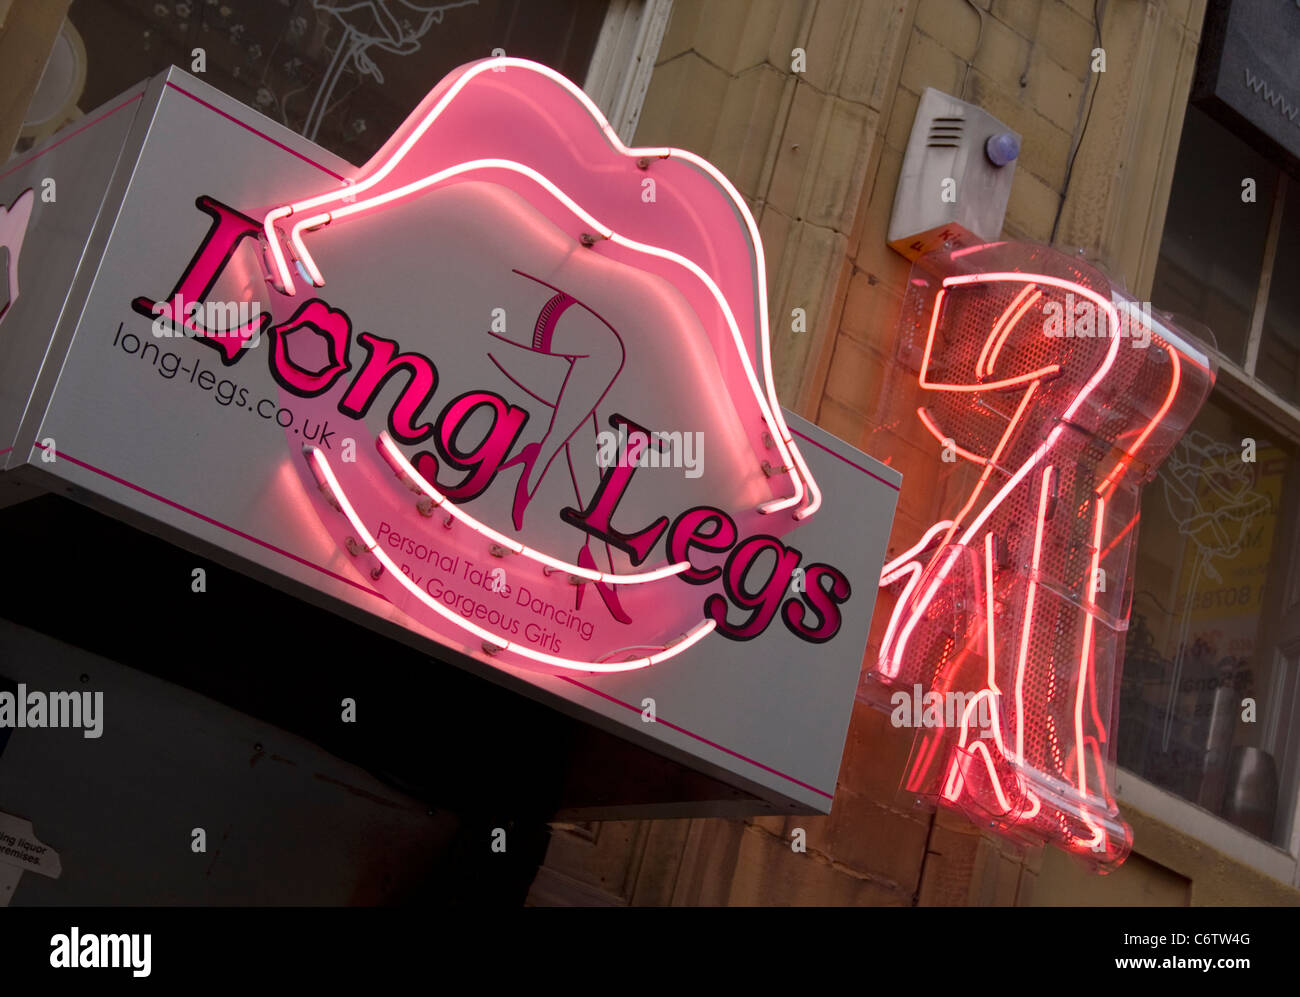 Has anyone been to Long Legs strip club in Manchester?